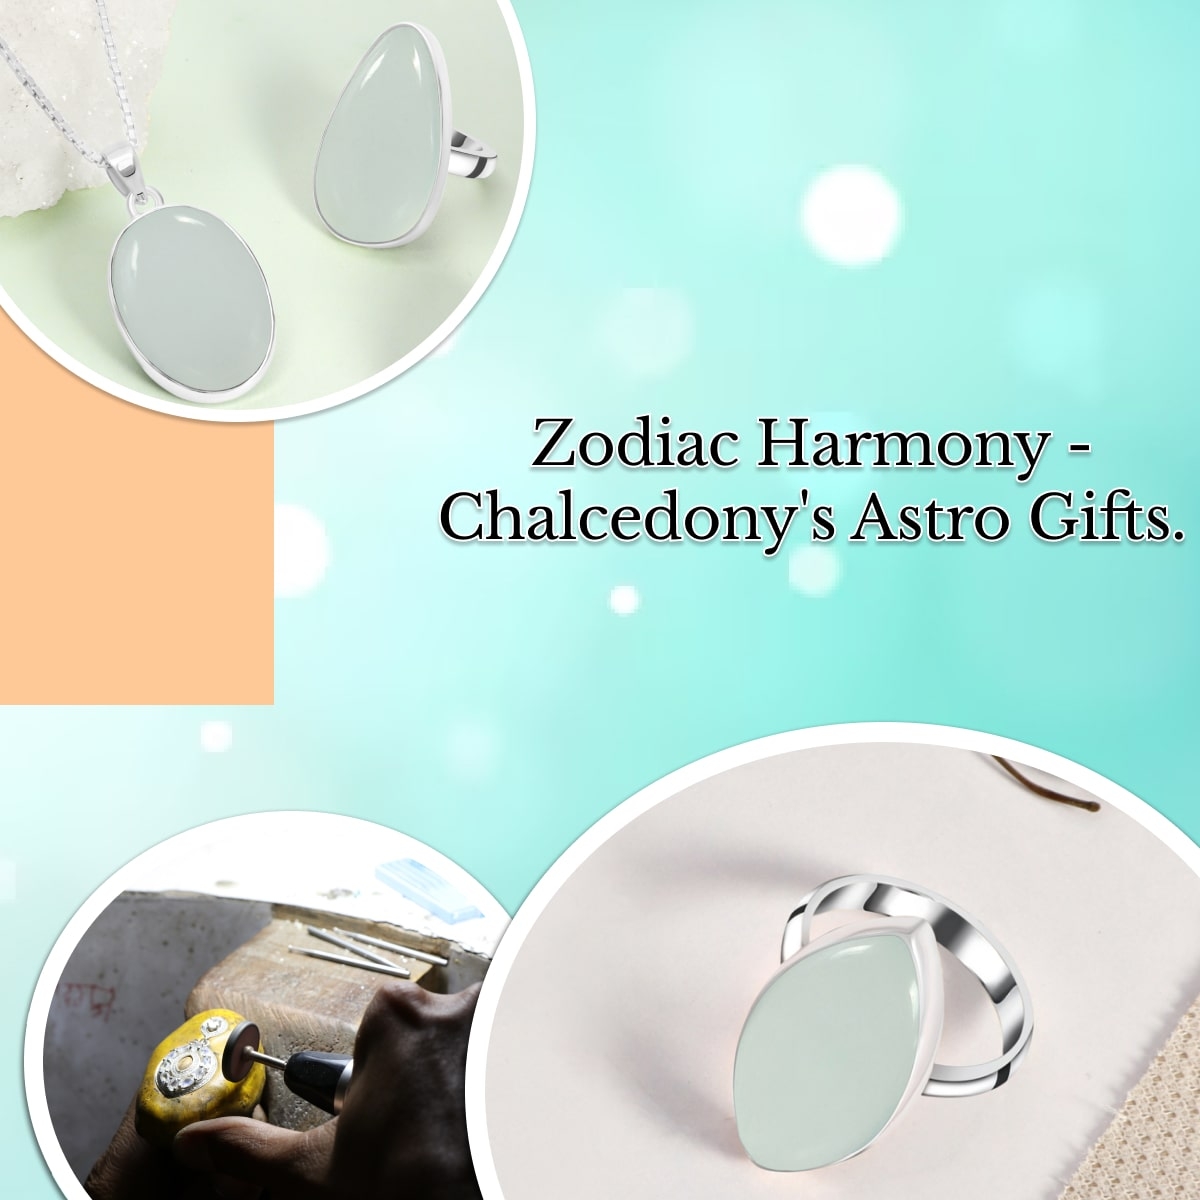 Some of the Astrological Benefits of Chalcedony Gemstone